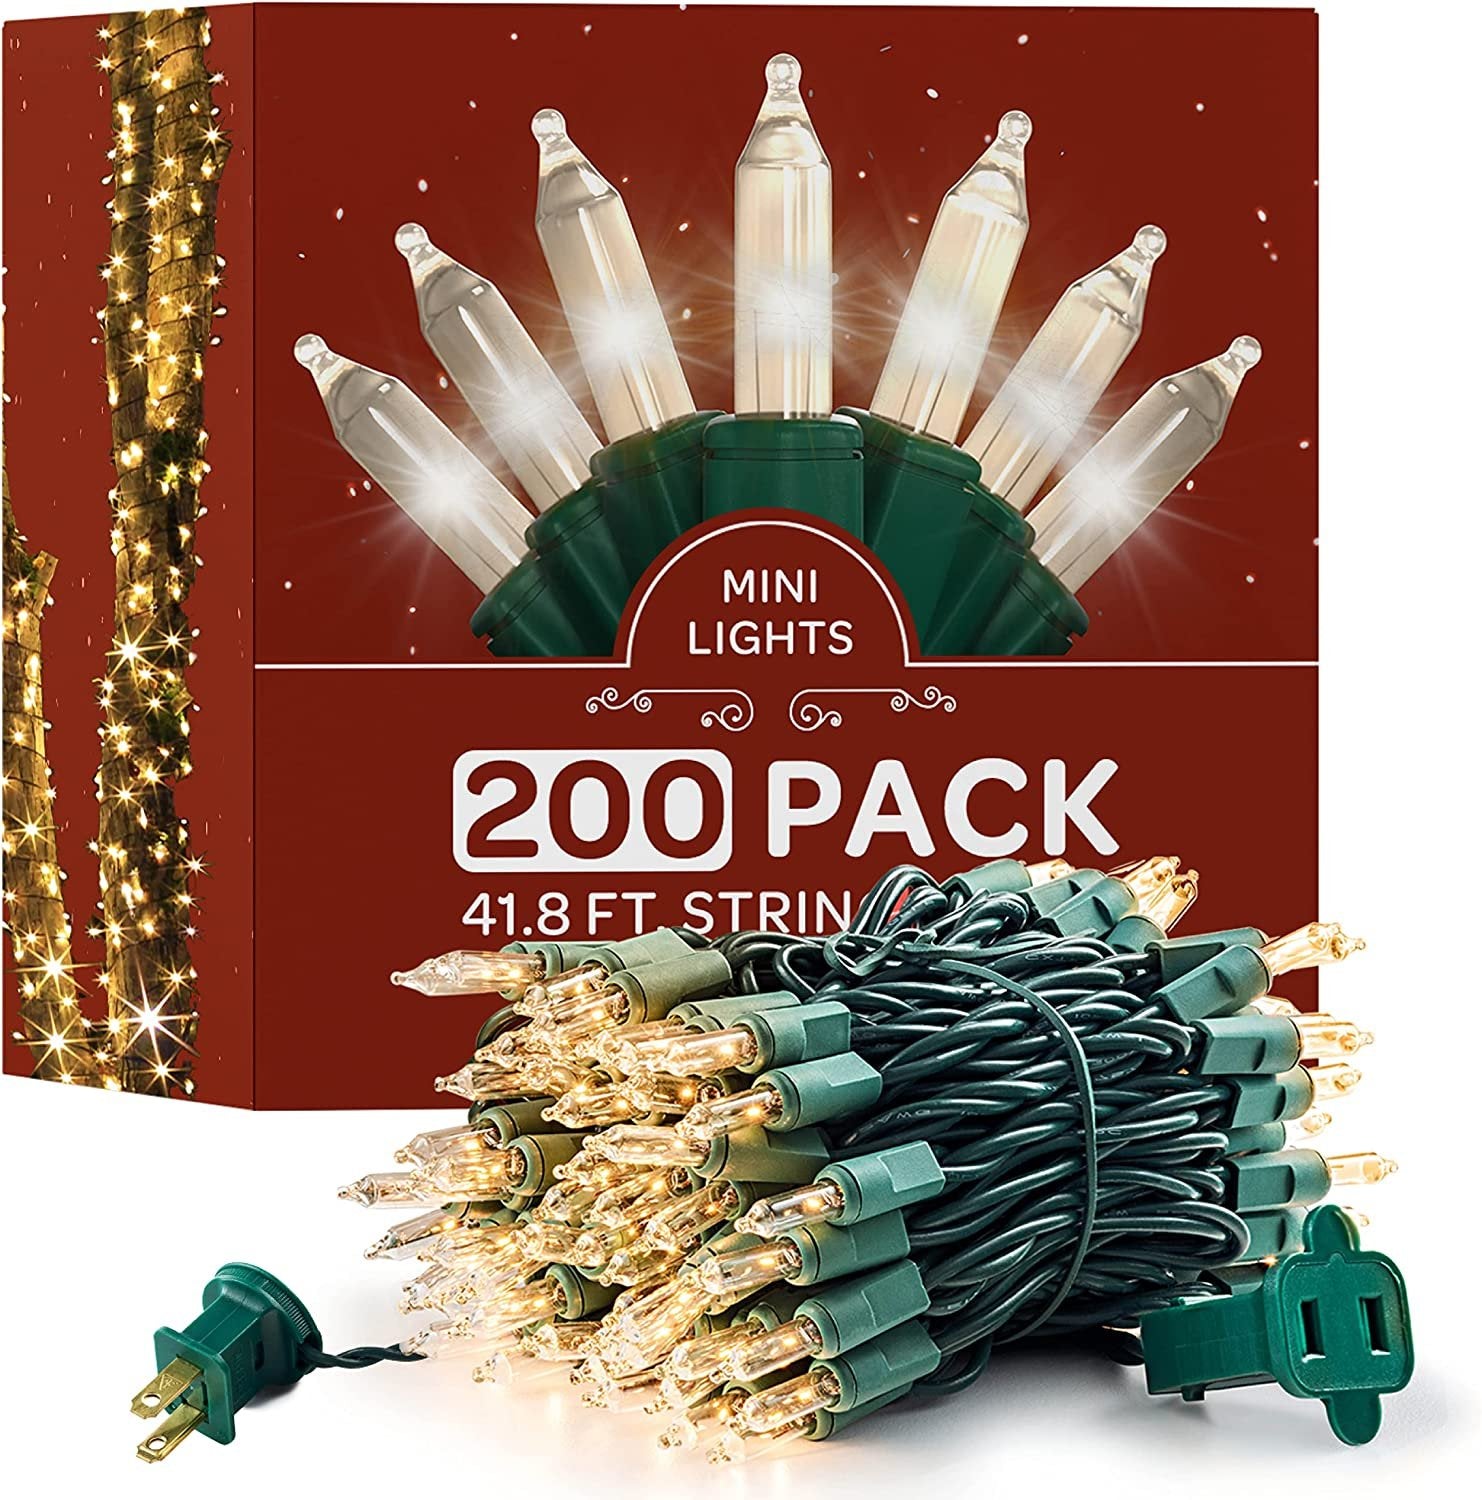 Christmas Lights [Set of 200] Warm White Christmas Lights, UL Listed for Indoor/Outdoor Use, Mini Christmas Lights, Small Christmas Lights for Holiday/Party Festival Decorations 41.45 Ft (Green Wire)